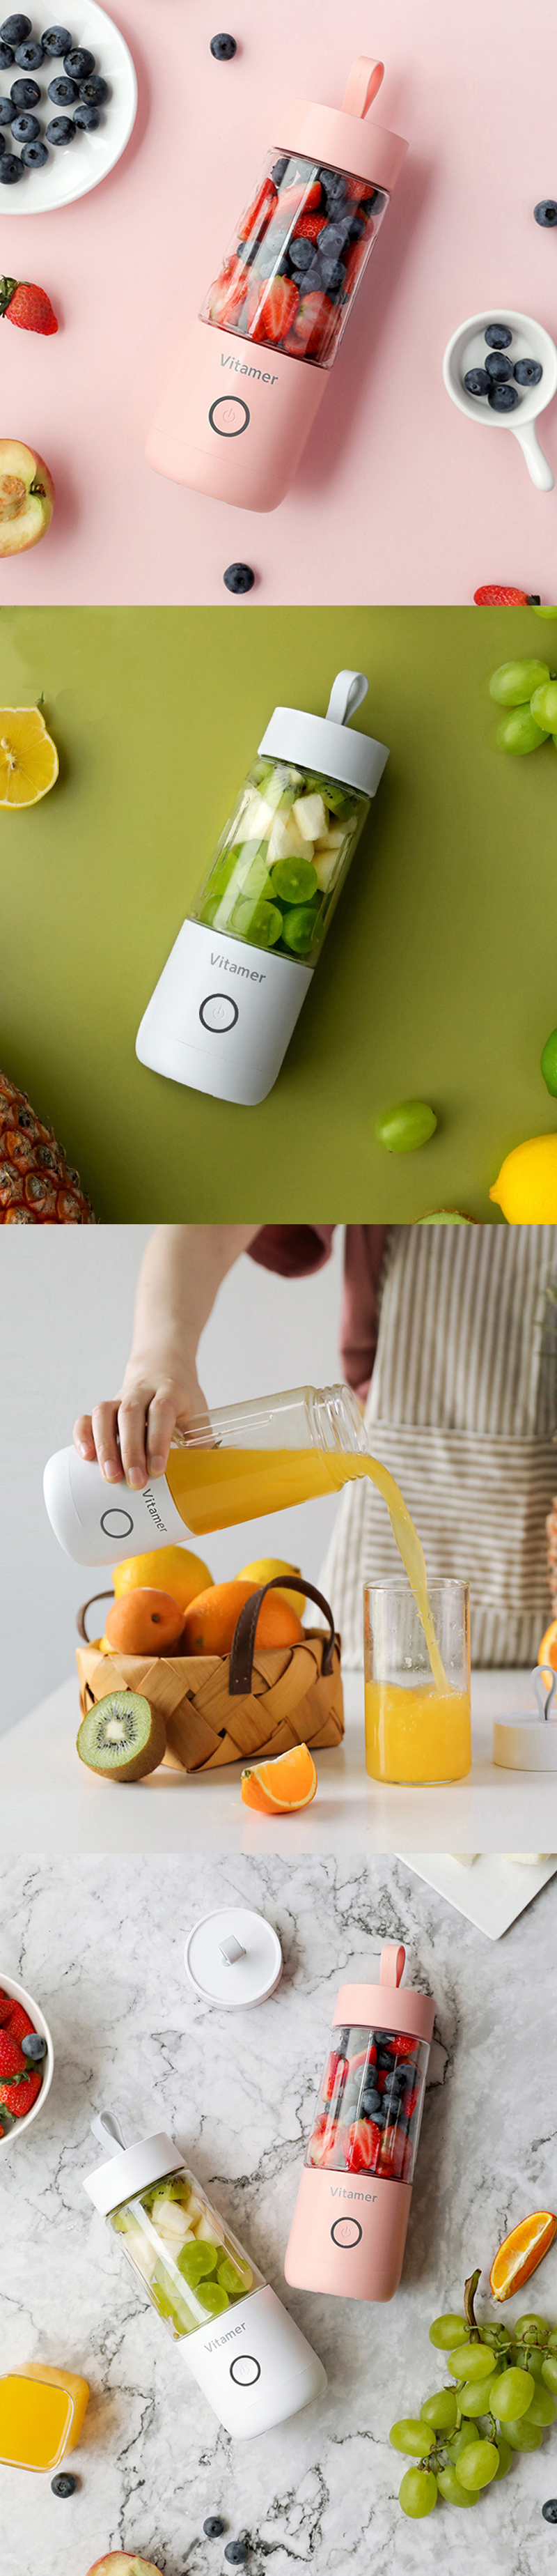 Vitamer 65W 350ml USB Automatic Fruit Juicer Bottle DIY Electric Juicing Extractor Cup Machine From Xioami Youpin 15